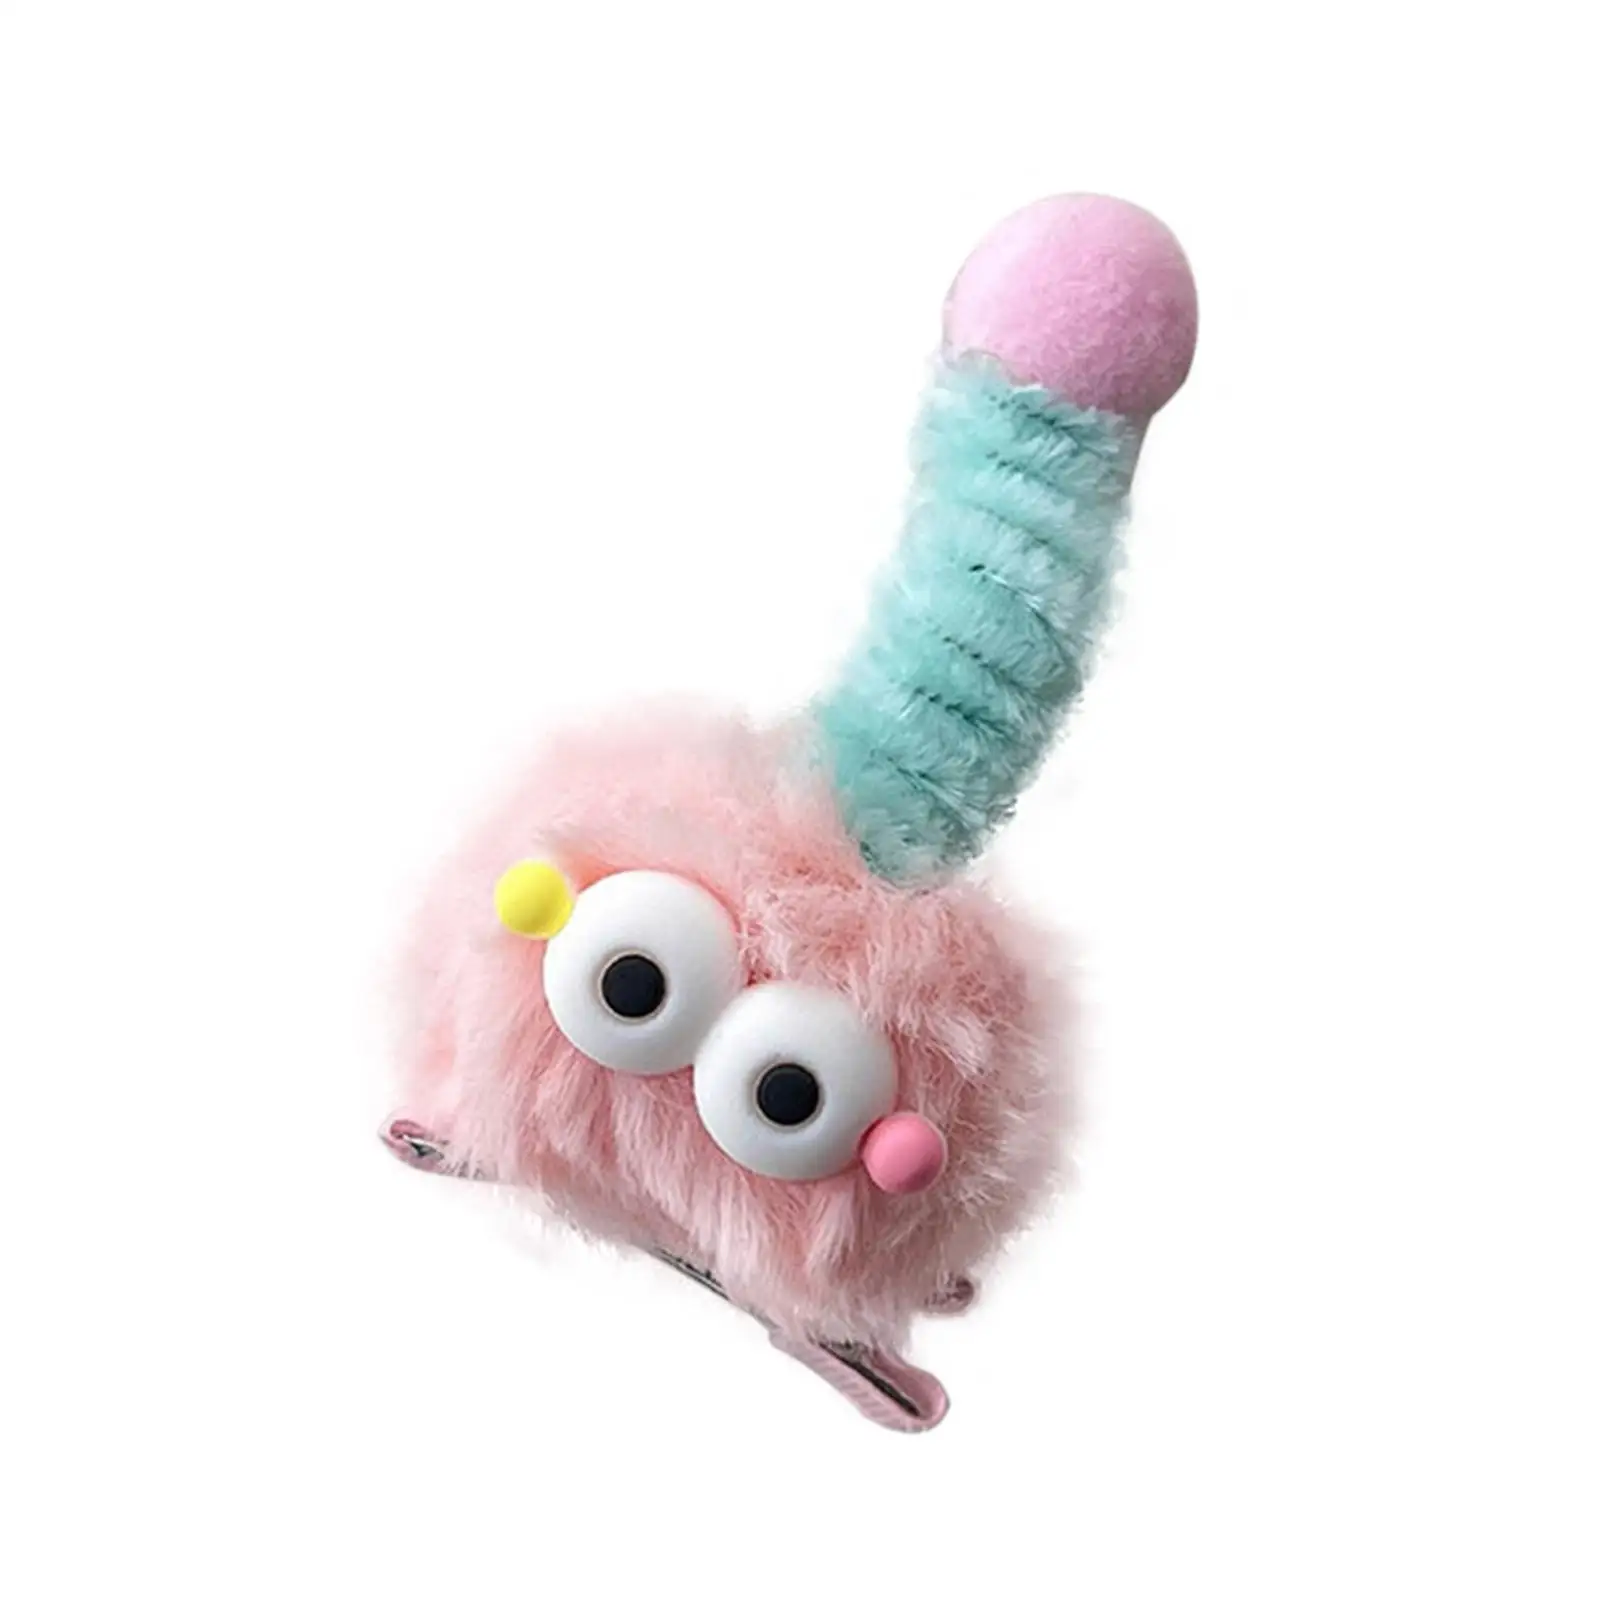 Hair Clips Decoration Cute Novelty Hair Accessories Plush Monster Birthday Gifts Bangs Clip for Kids Girls Children Adults Women